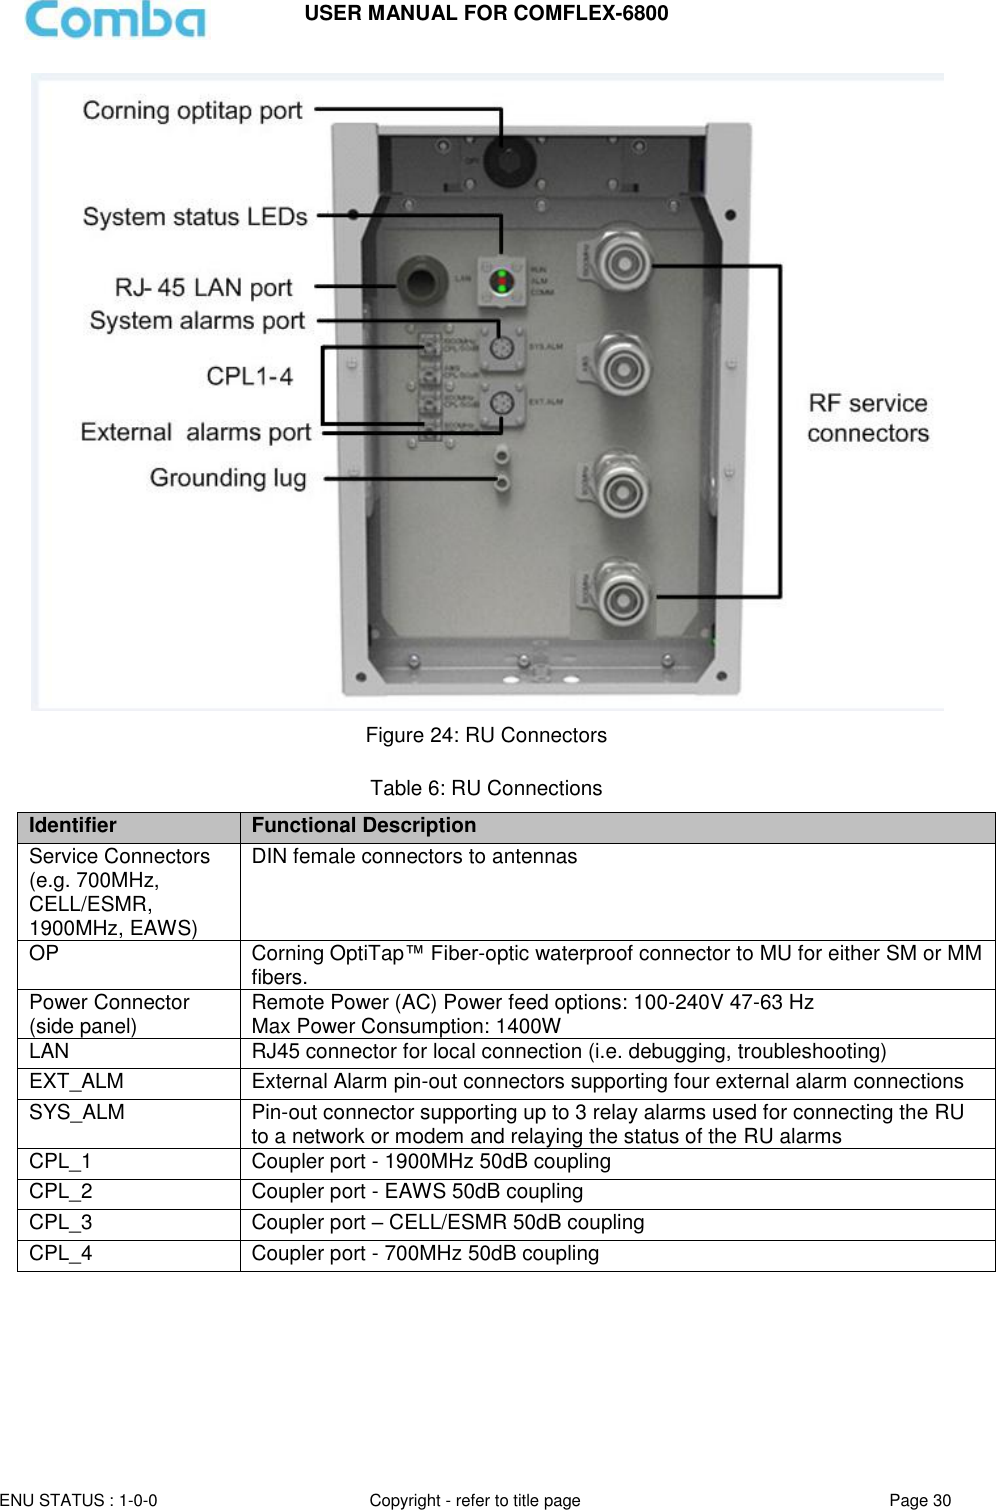 USER MANUAL FOR COMFLEX-6800  ENU STATUS : 1-0-0 Copyright - refer to title page Page 30   Figure 24: RU Connectors  Table 6: RU Connections Identifier Functional Description Service Connectors  (e.g. 700MHz, CELL/ESMR, 1900MHz, EAWS) DIN female connectors to antennas OP Corning OptiTap™ Fiber-optic waterproof connector to MU for either SM or MM fibers.  Power Connector  (side panel) Remote Power (AC) Power feed options: 100-240V 47-63 Hz Max Power Consumption: 1400W LAN RJ45 connector for local connection (i.e. debugging, troubleshooting) EXT_ALM External Alarm pin-out connectors supporting four external alarm connections SYS_ALM Pin-out connector supporting up to 3 relay alarms used for connecting the RU to a network or modem and relaying the status of the RU alarms  CPL_1  Coupler port - 1900MHz 50dB coupling CPL_2 Coupler port - EAWS 50dB coupling CPL_3 Coupler port – CELL/ESMR 50dB coupling CPL_4 Coupler port - 700MHz 50dB coupling 